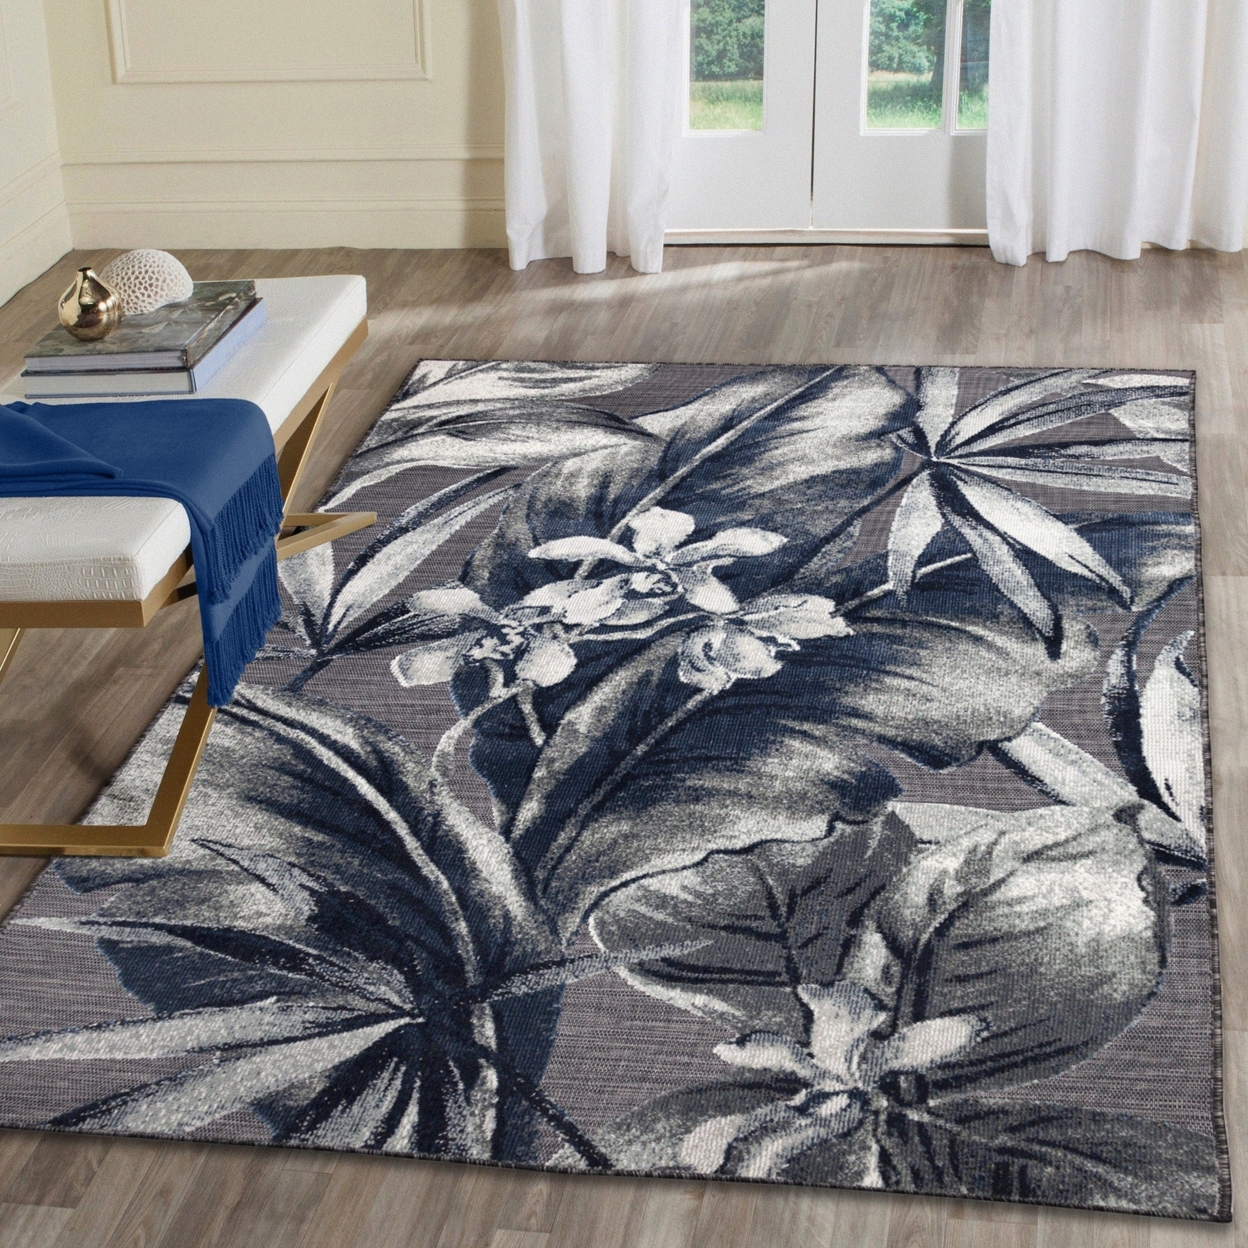 Liora Manne Canyon Tropical Leaf Indoor Outdoor Area Rug Charcoal - 7'8 X 9'10